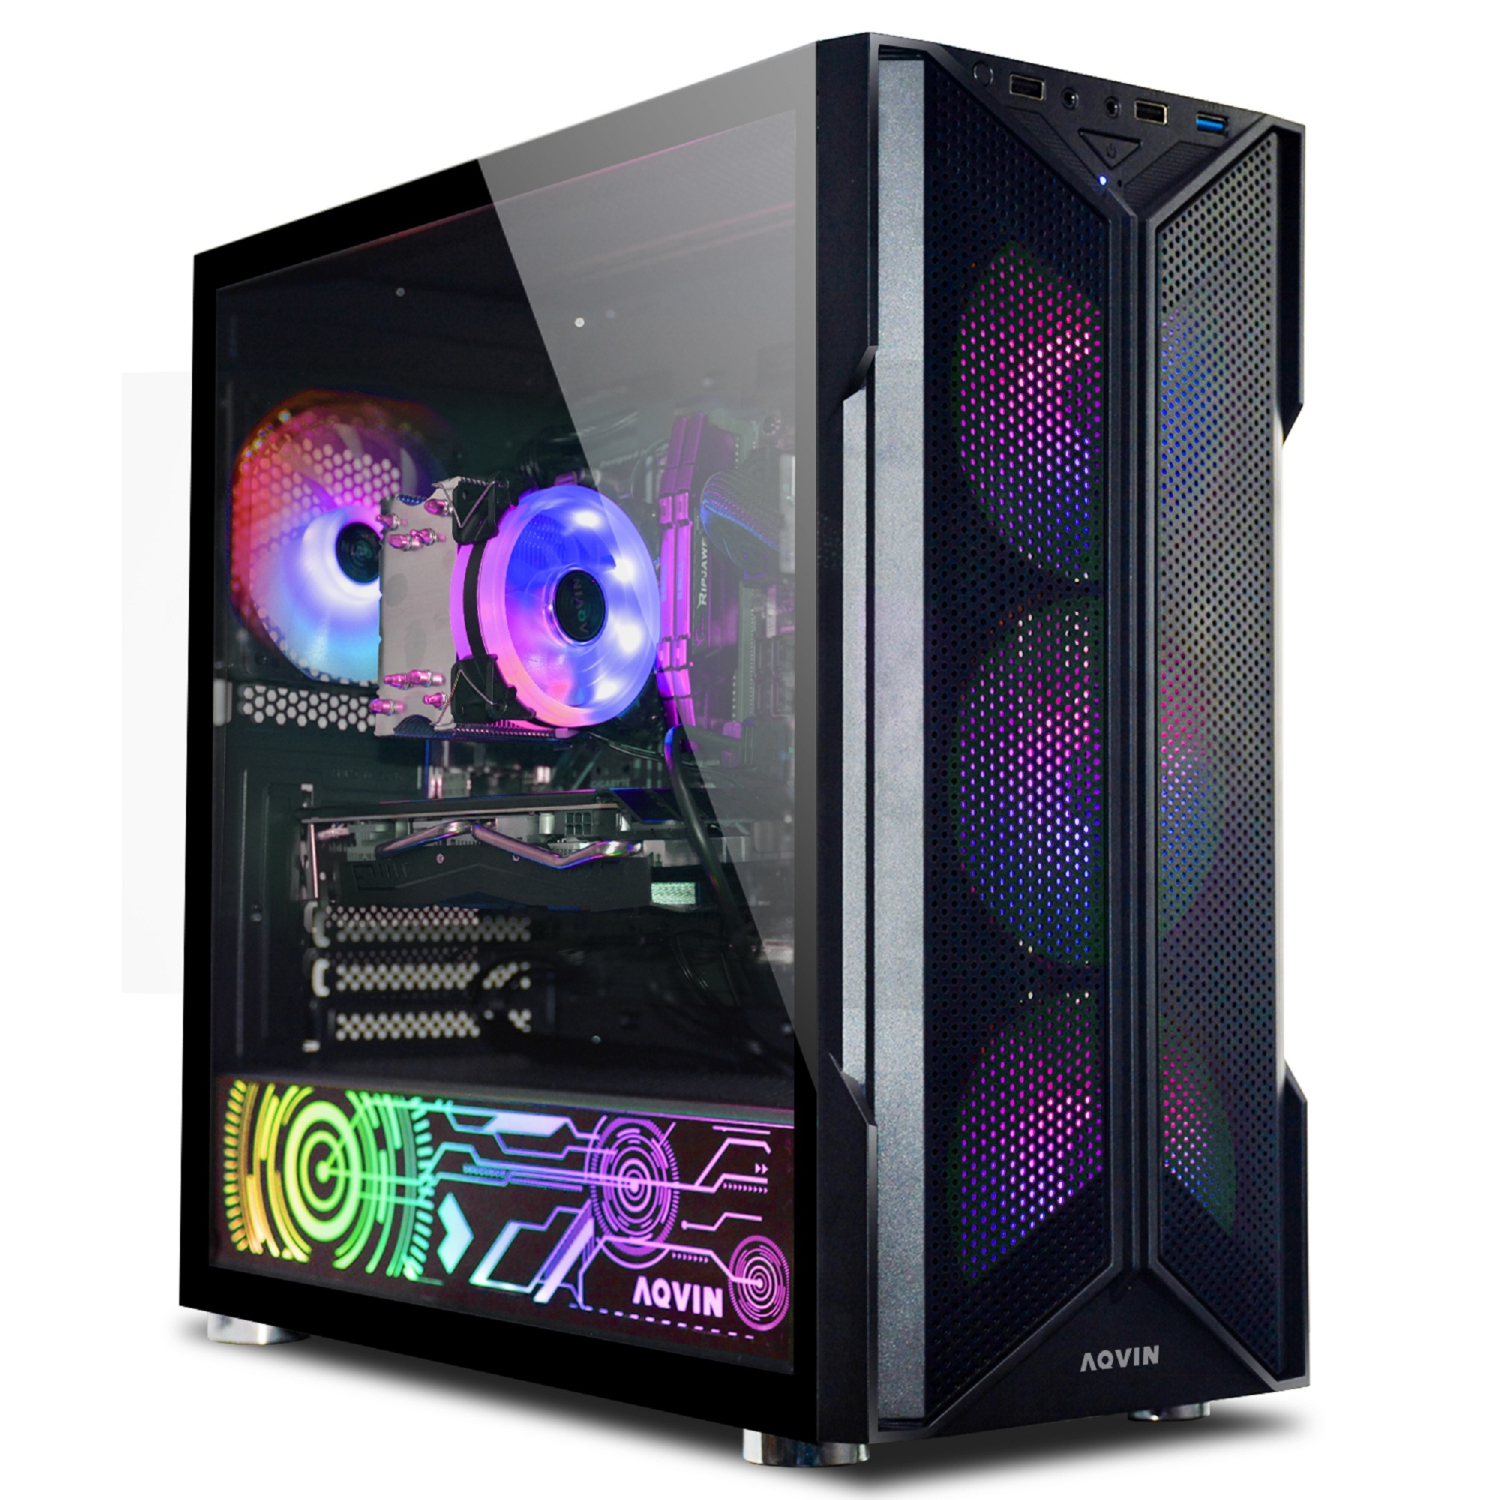 AQVIN-AQ20 Desktop Computer Tower Gaming PC - RGB (Intel Core i5 processor/ 32GB RAM/ 1TB SSD/ AMD RX 580 8GB/ Windows 11/ WiFi) Gaming Keyboard and Mouse- Only at Best Buy